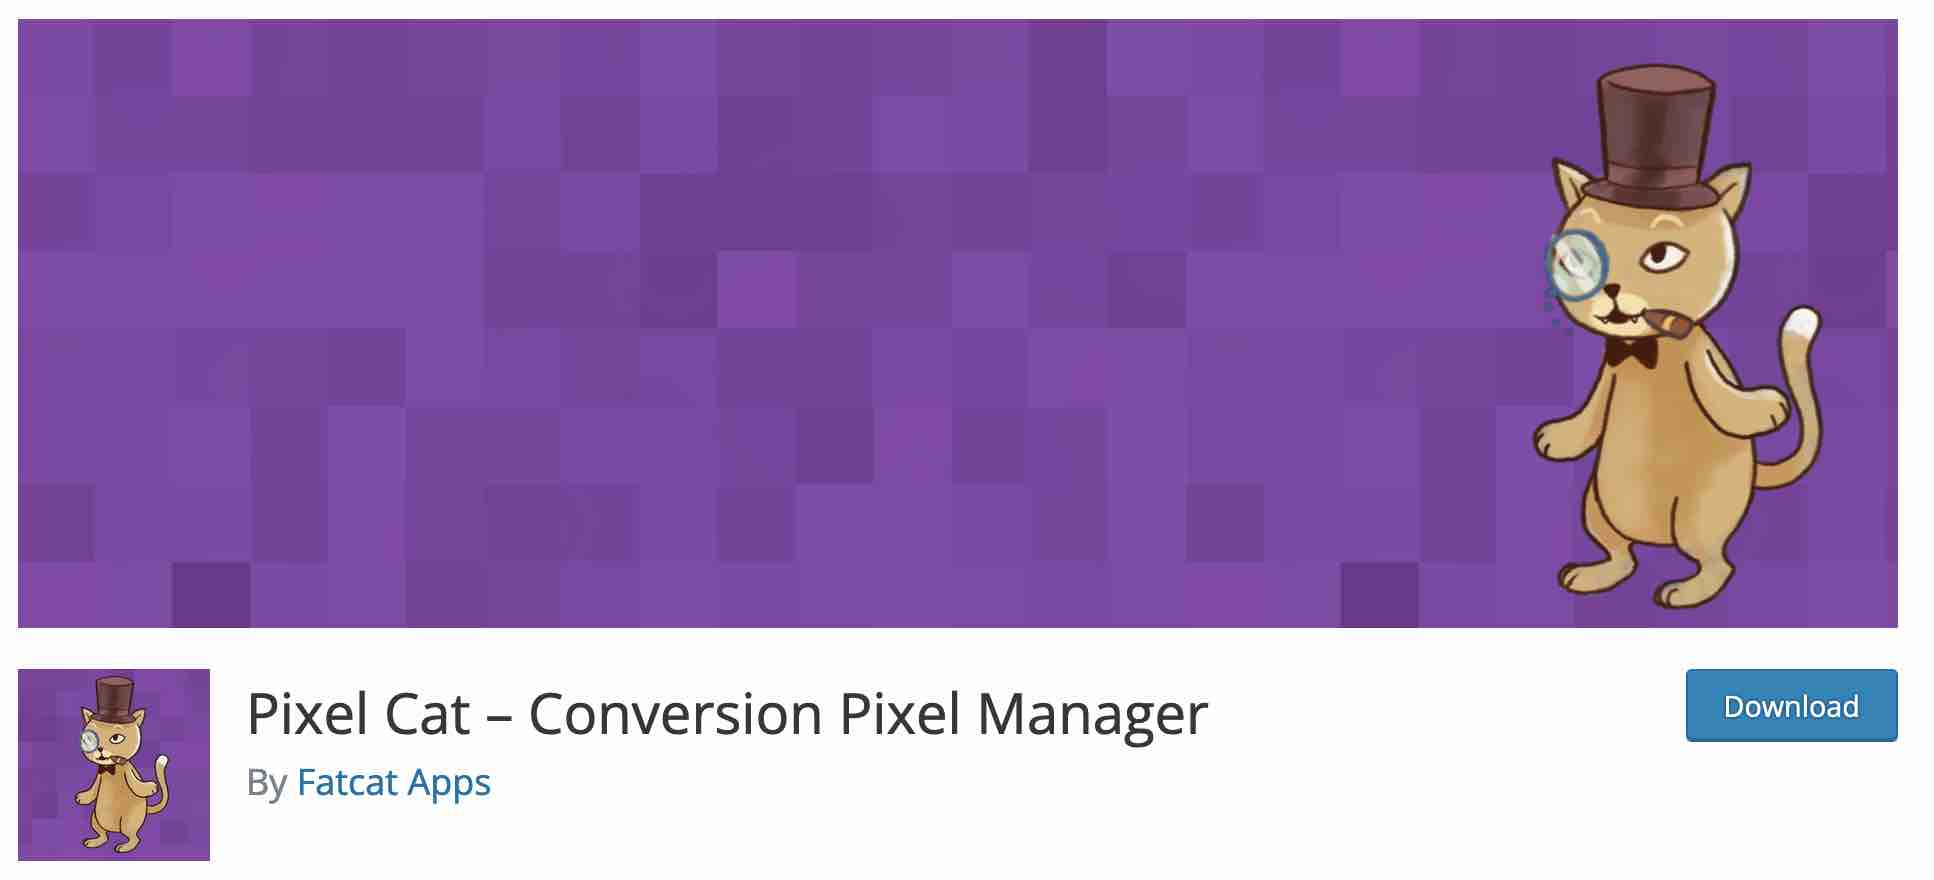 Pixel Cat plugin to download on the WordPress official directory.